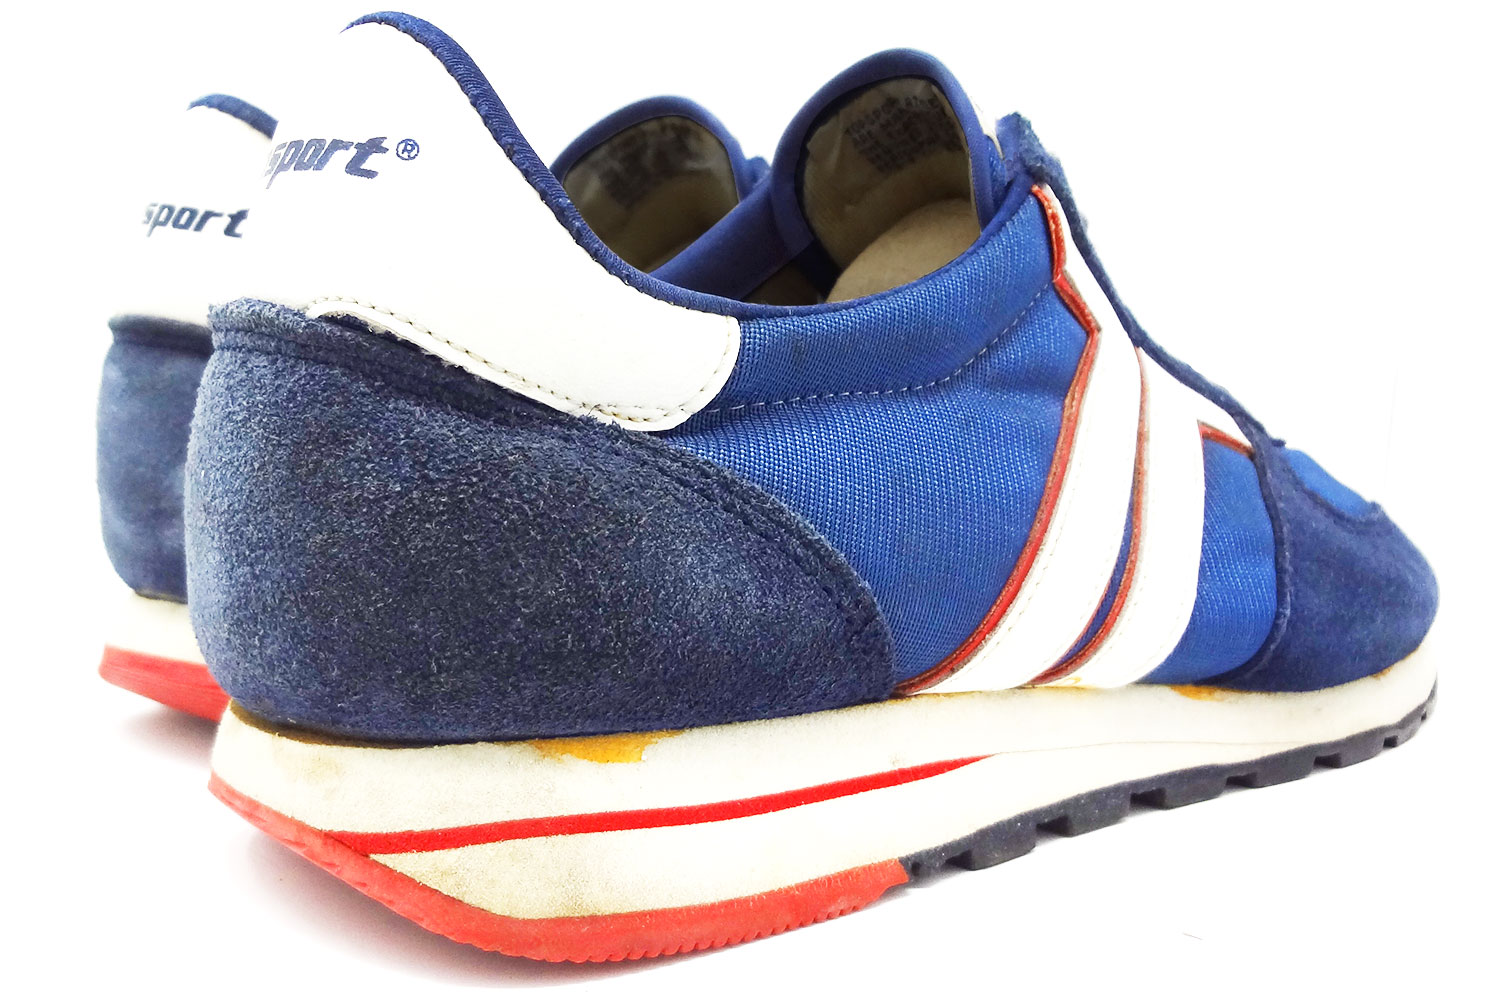 Obscure 1980s Topsport vintage sneakers @ The Deffest